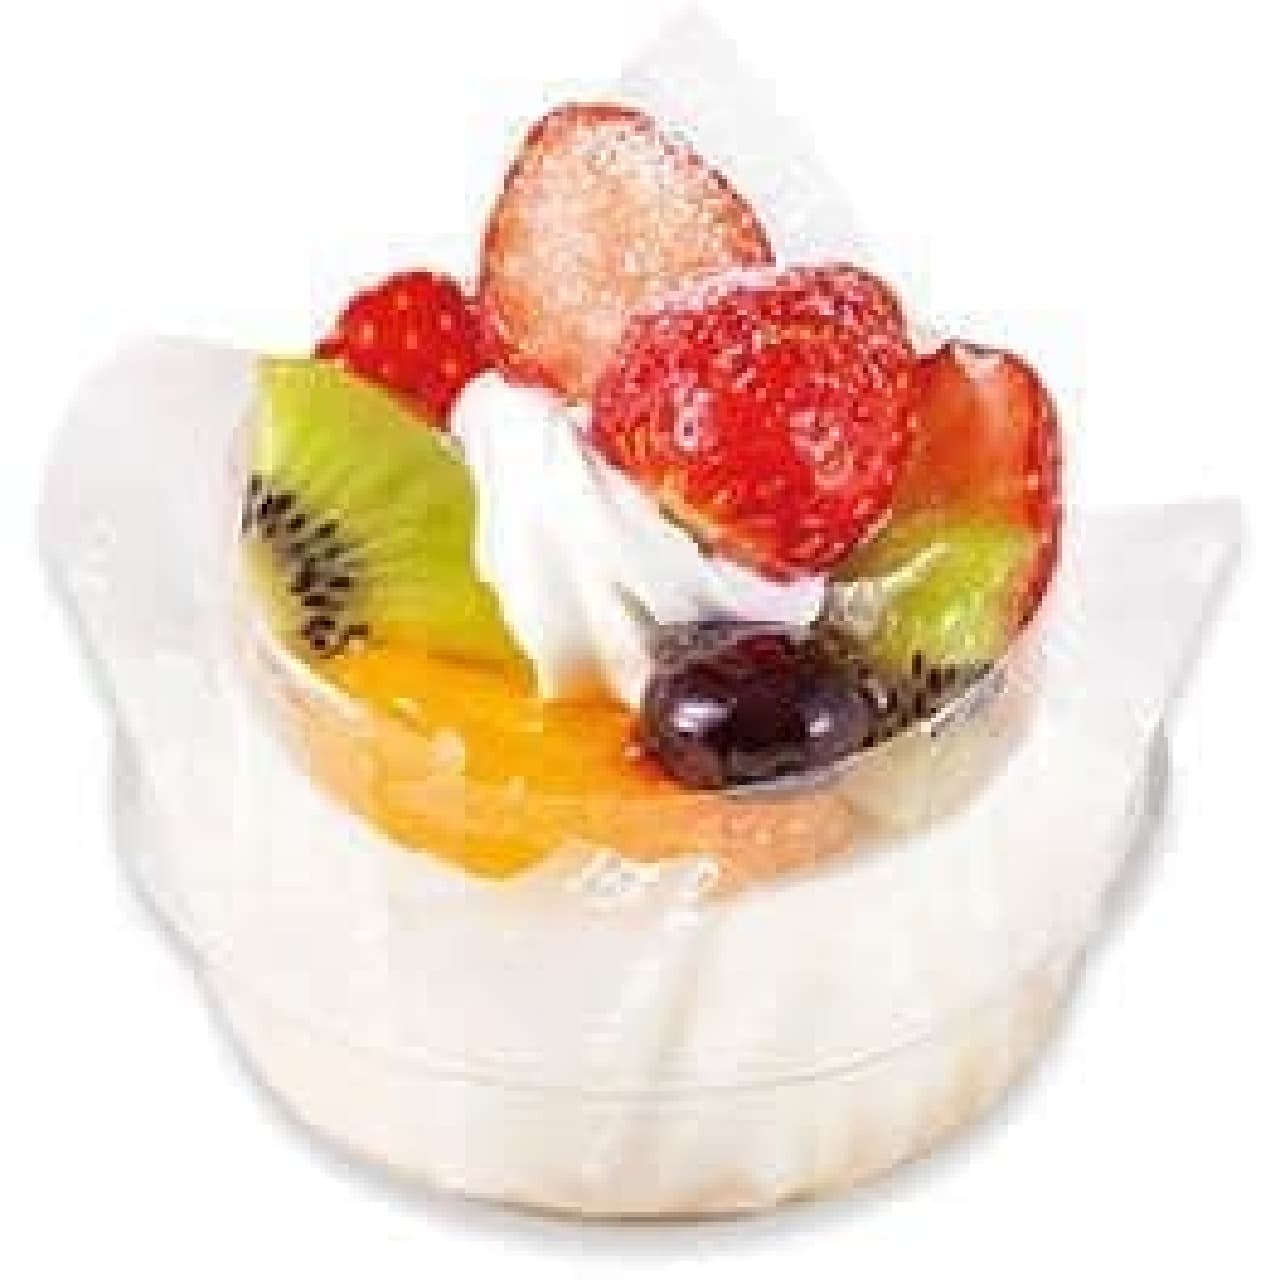 Fujiya pastry shop "Strawberry and fruit color rare cheese"